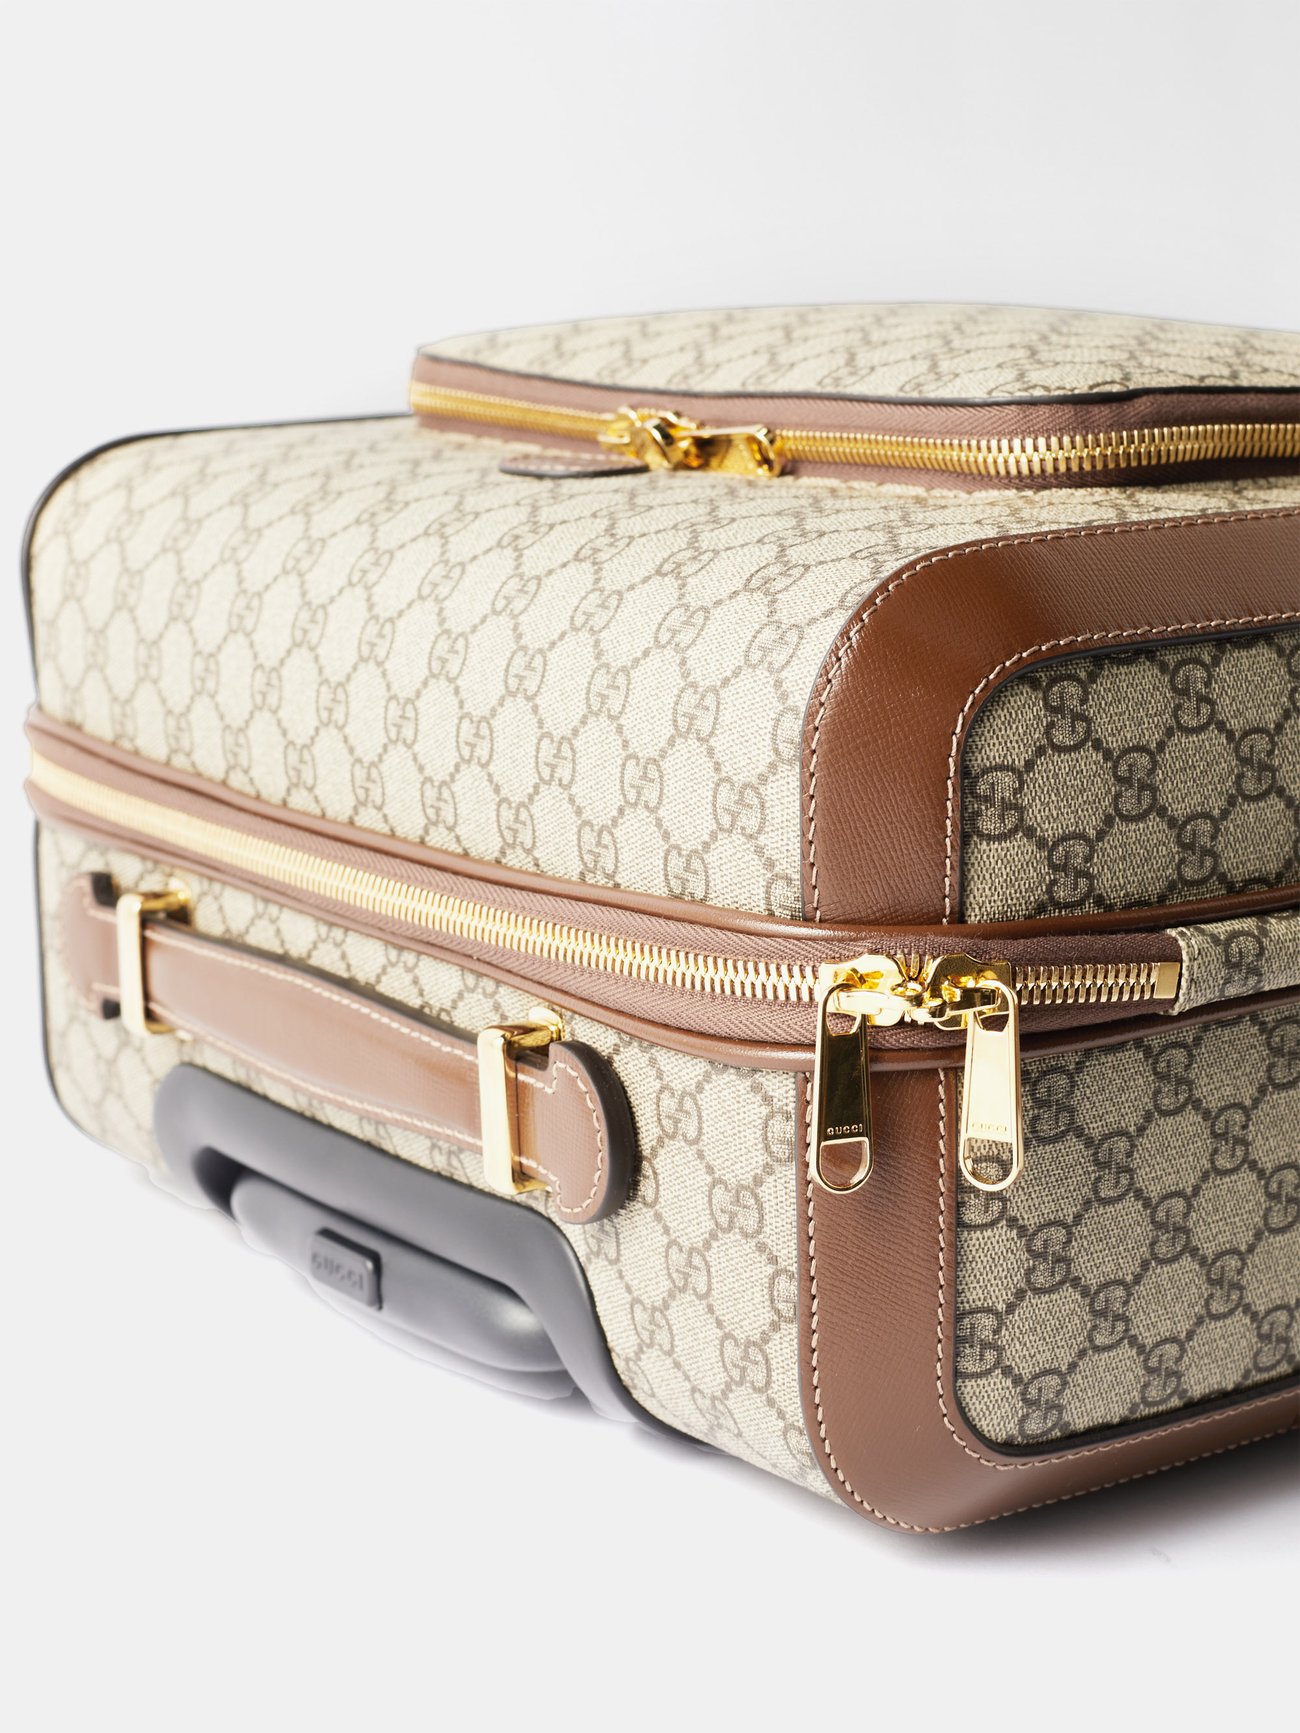 GUCCI Carry Bag 451001 suitcase GG Supreme Canvas/leather beige beige –